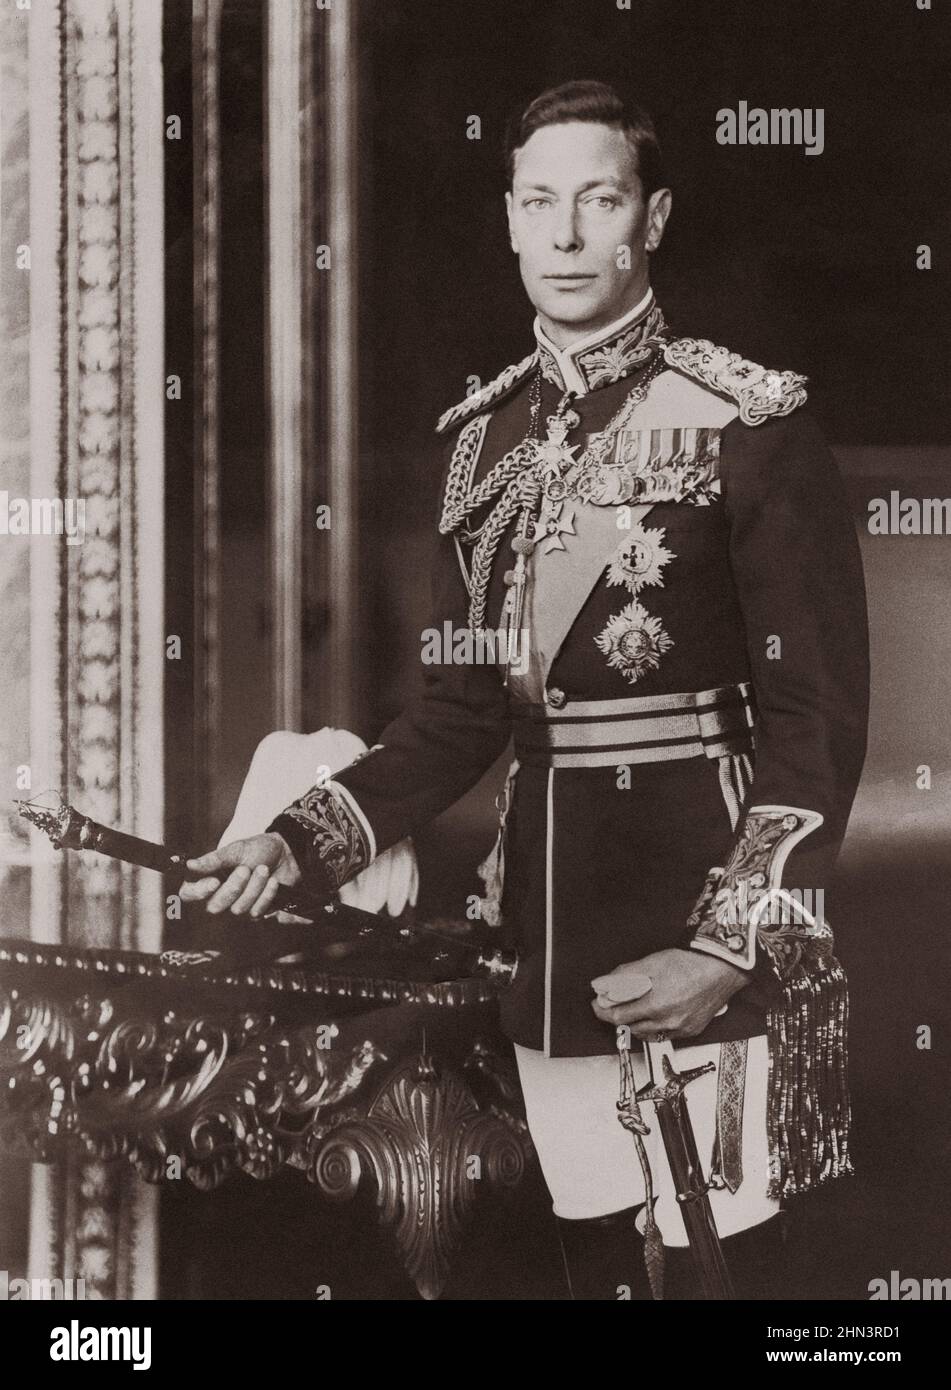 His Majesty King George VI of Great Britain. 1940s George VI (Albert Frederick Arthur George; 1895 – 1952) was King of the United Kingdom and the Domi Stock Photo